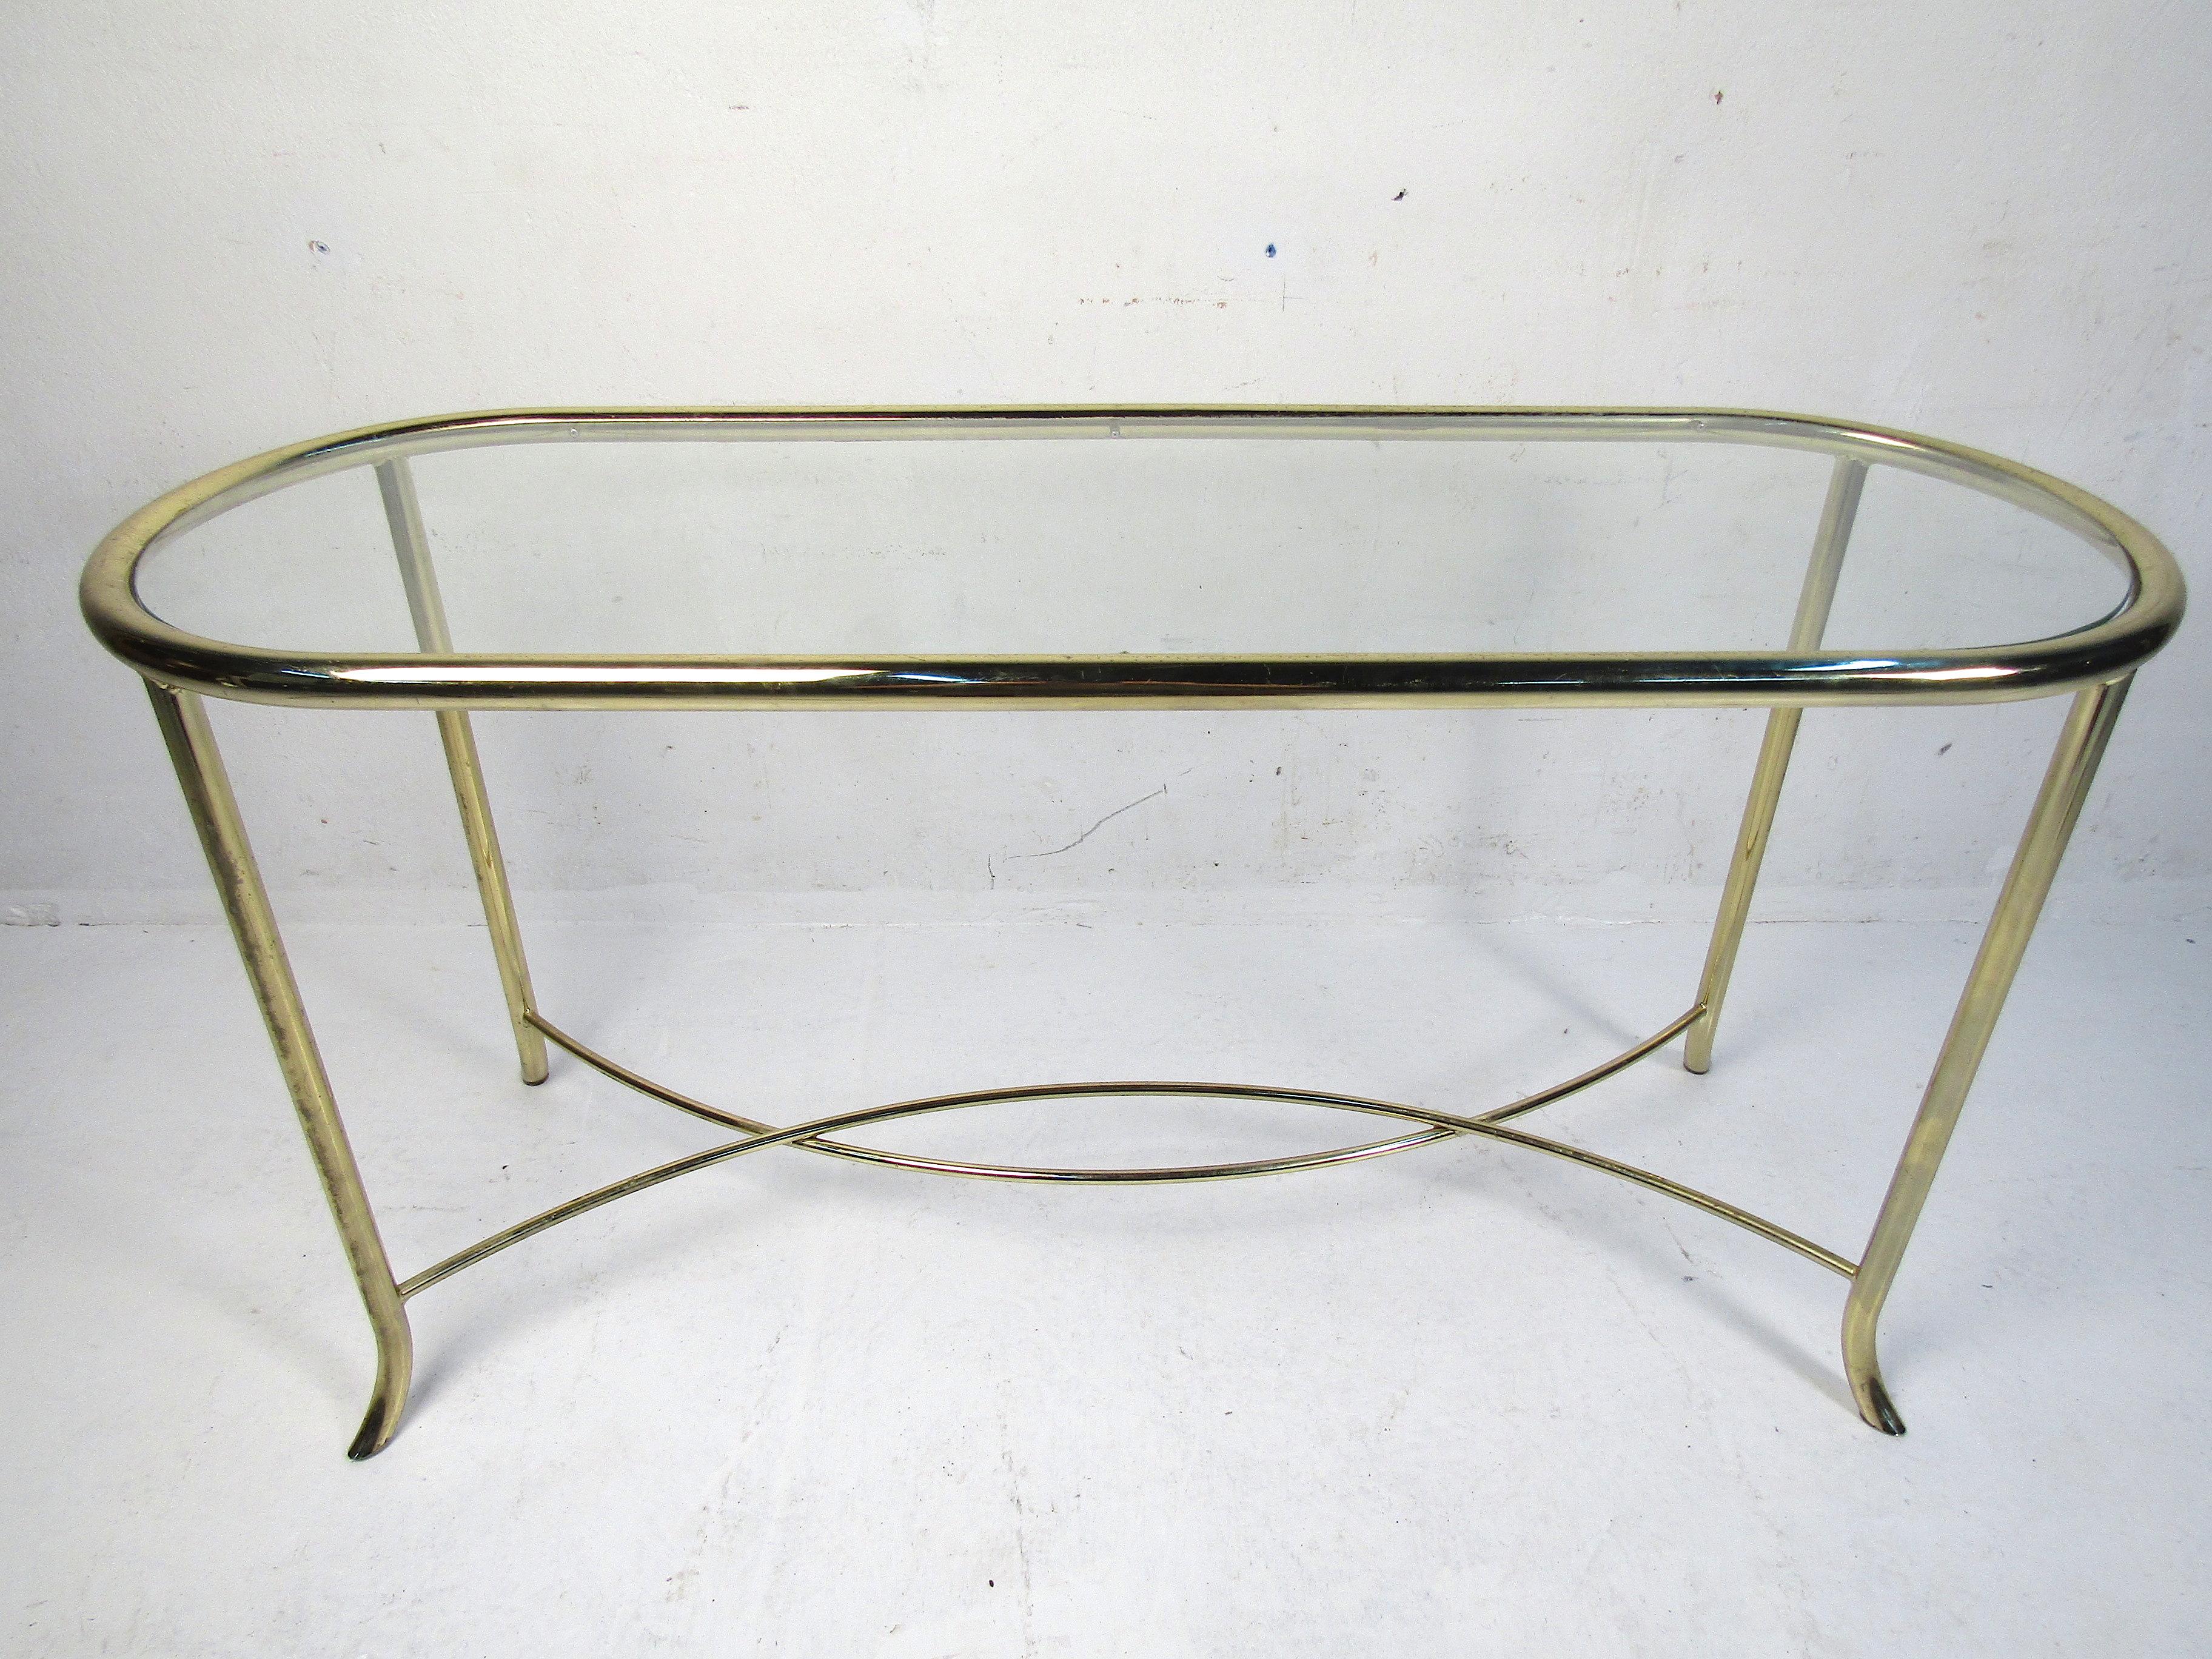 Stylish mid-century style console table. Brass colored frame with a glass insert serving as the tabletop. Please confirm item location with dealer (NJ or NY).